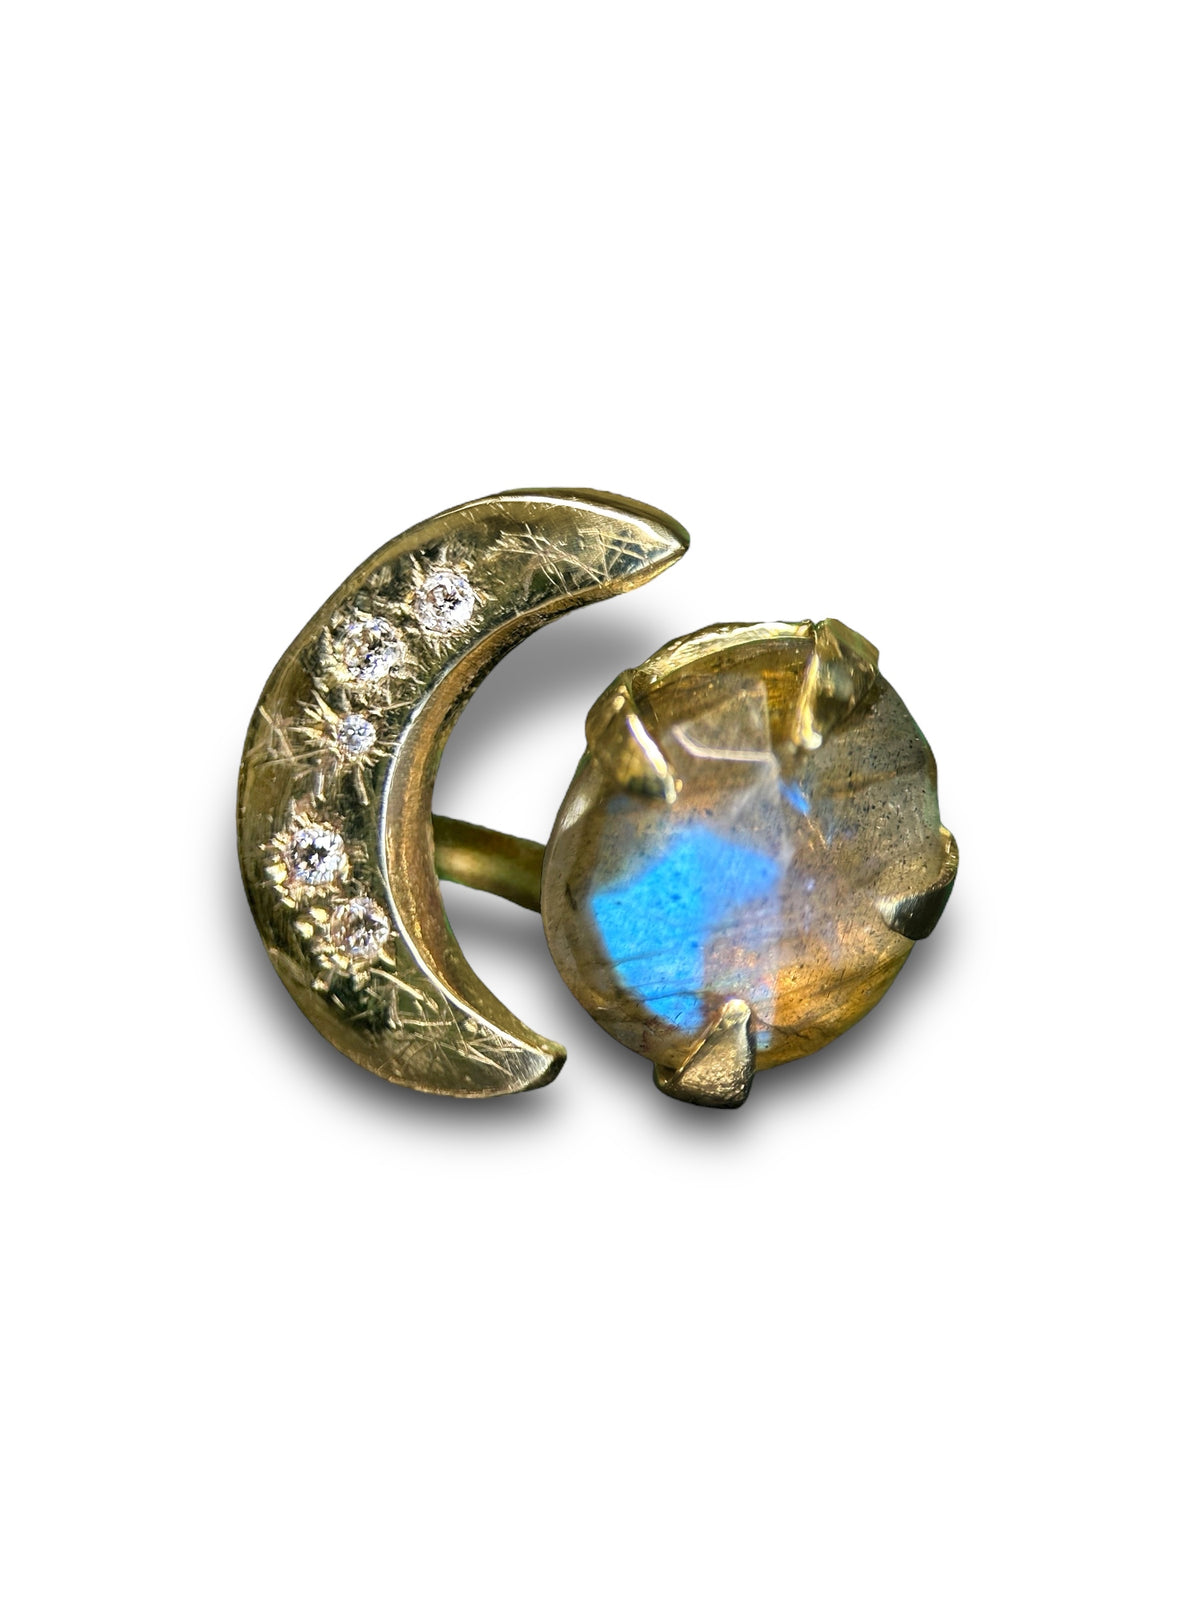 Starry Night Moon Crescent Ring with Diamonds and a Labradorite 14 K Gold